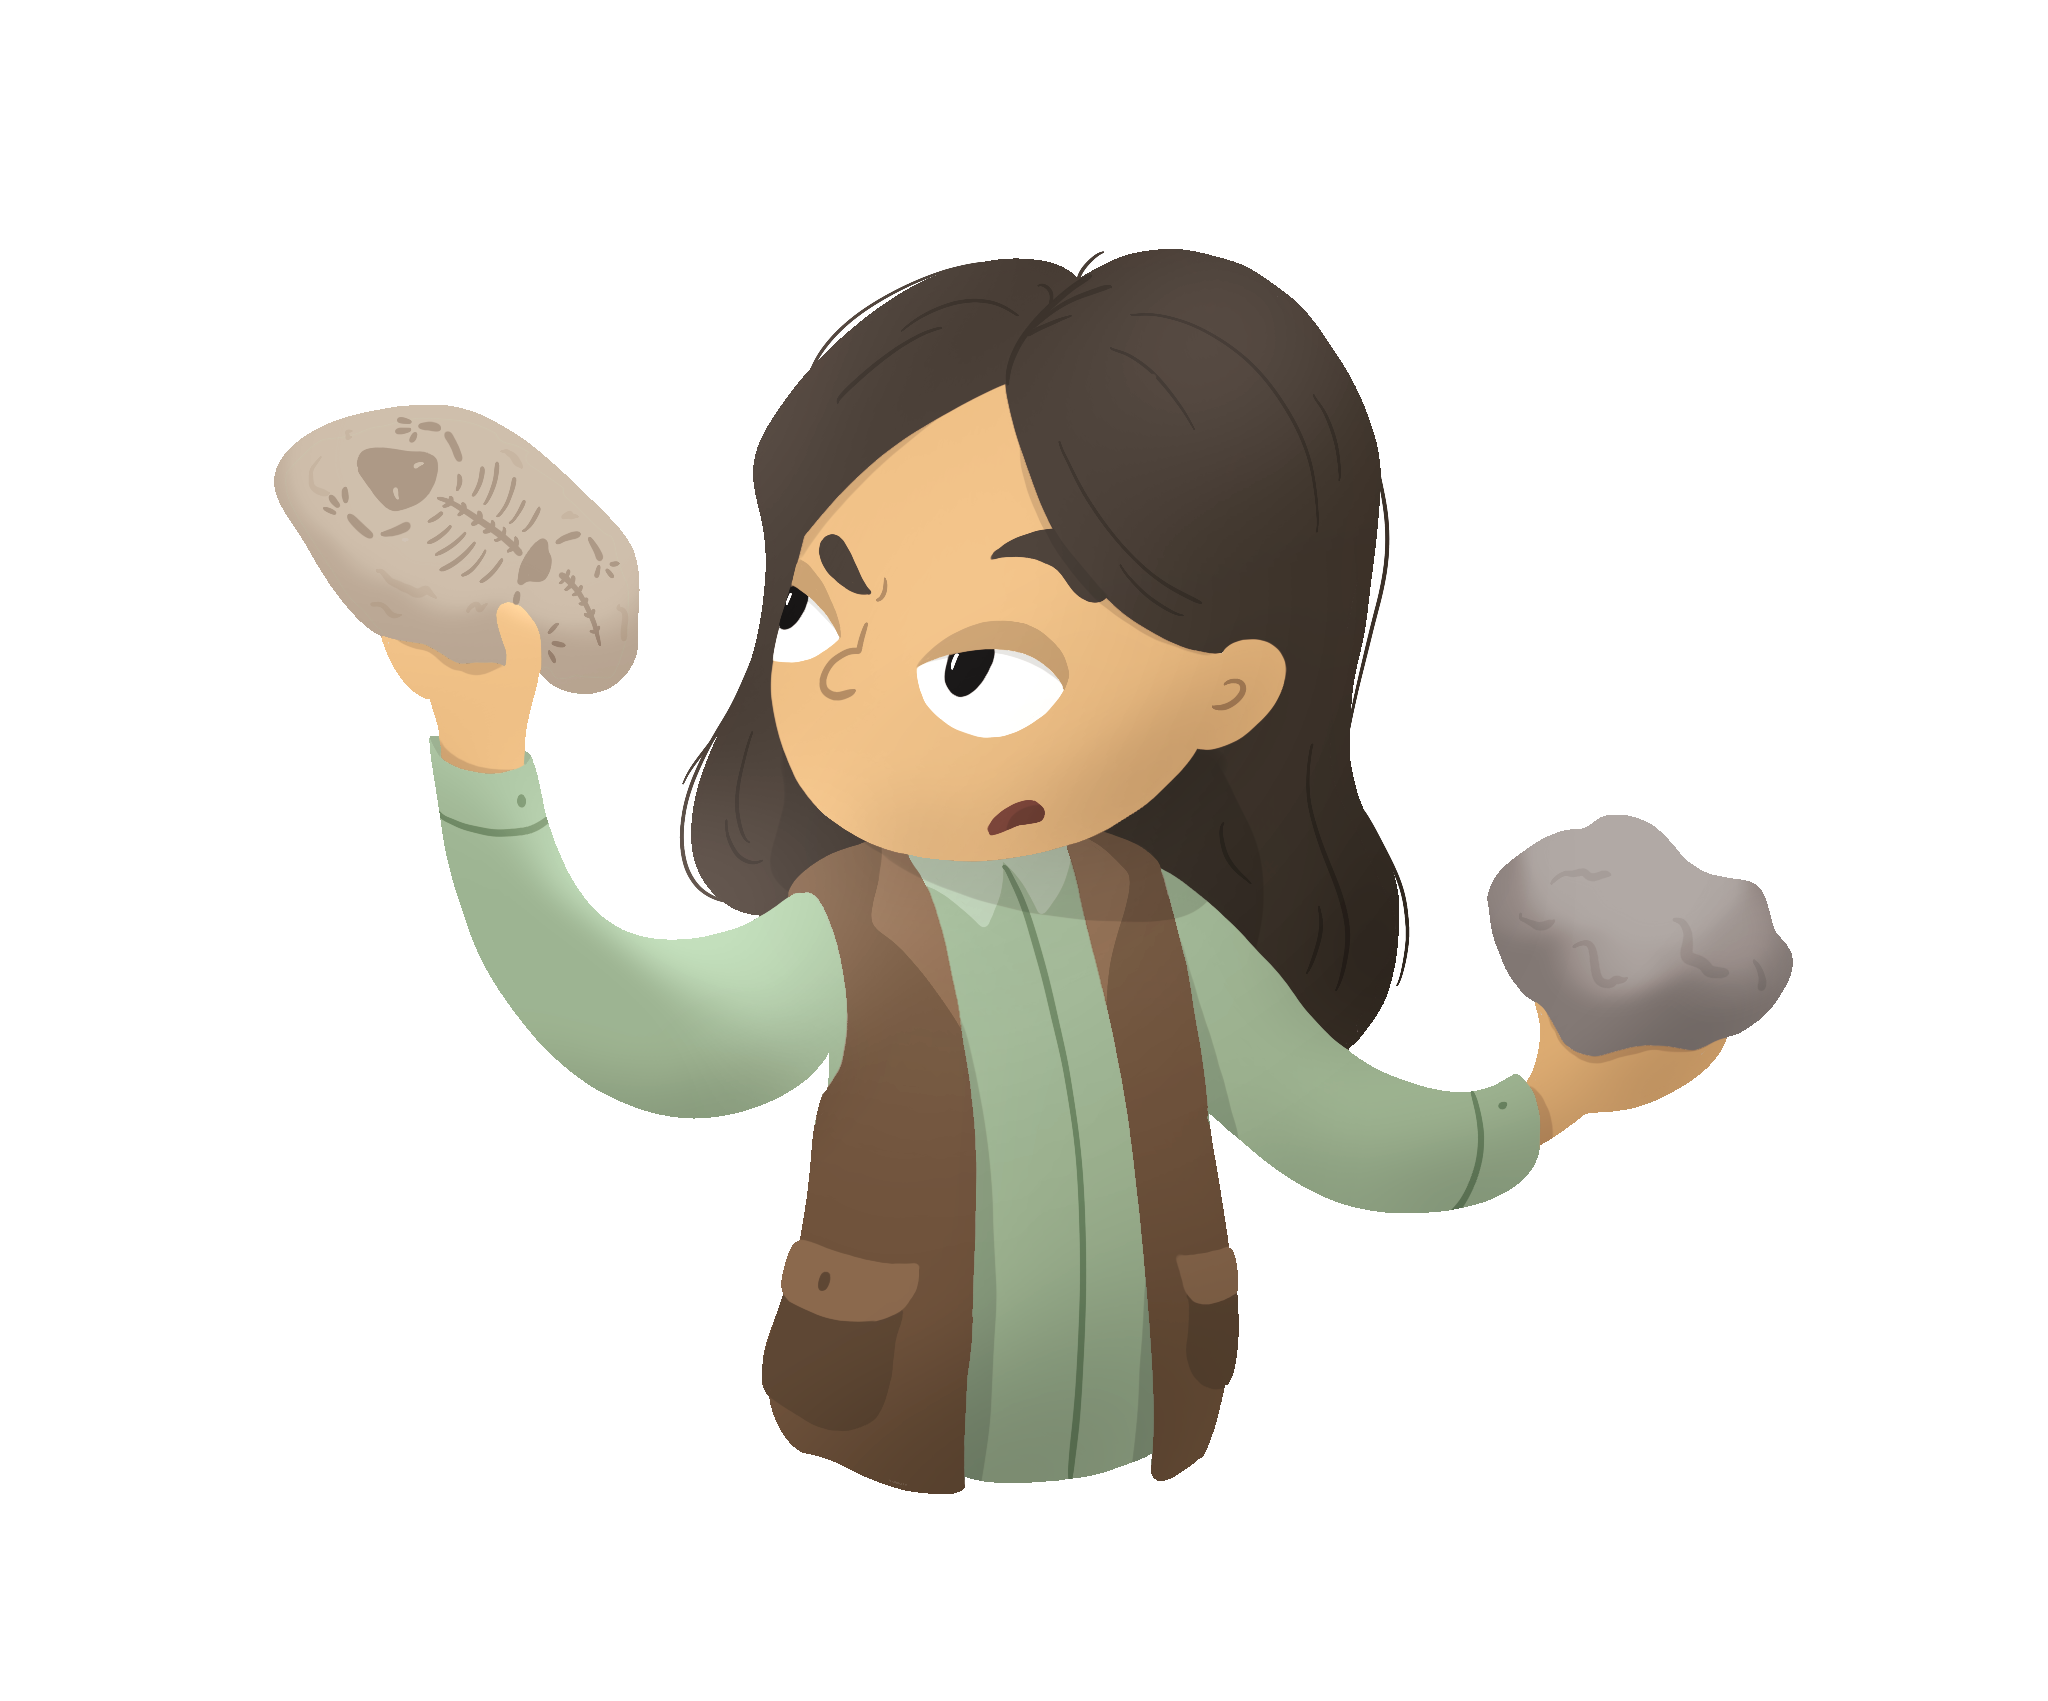 a woman holds two rocks inquisitively. one is plain and the other has a fish fossil